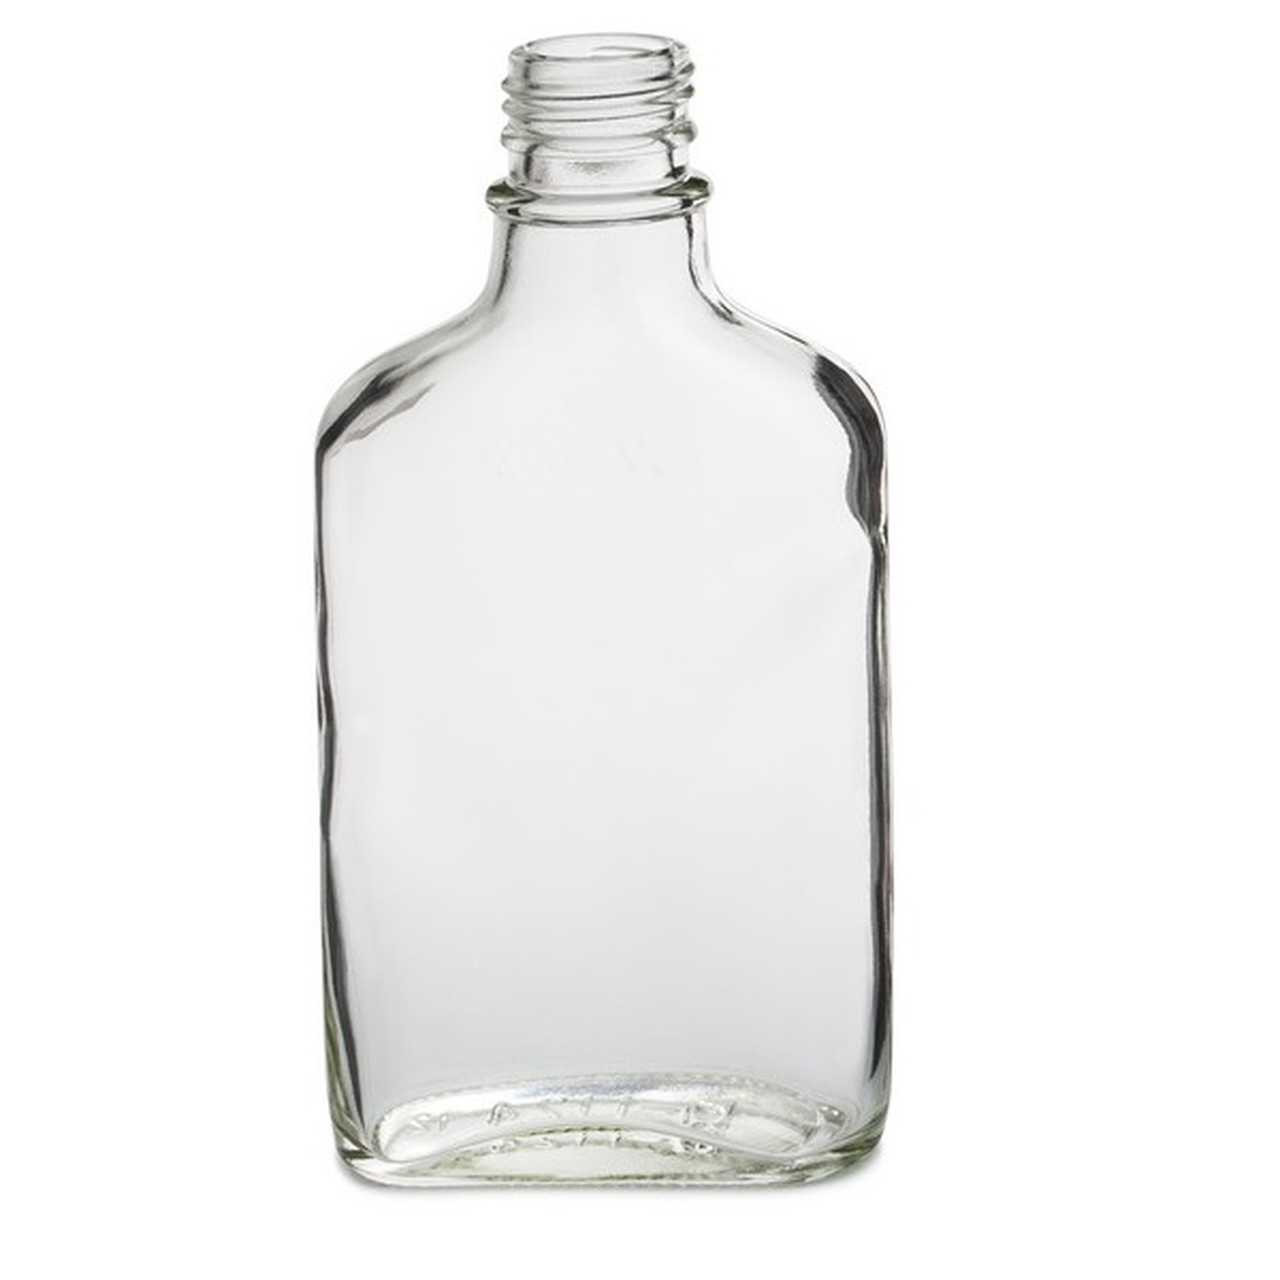 https://cdn11.bigcommerce.com/s-1ybtx/images/stencil/1280x1280/products/1226/6578/375-ml-Flask-Glass-Bottle-with-Tamper-Evident-Cap_3952__39695.1699988985.jpg?c=2?imbypass=on